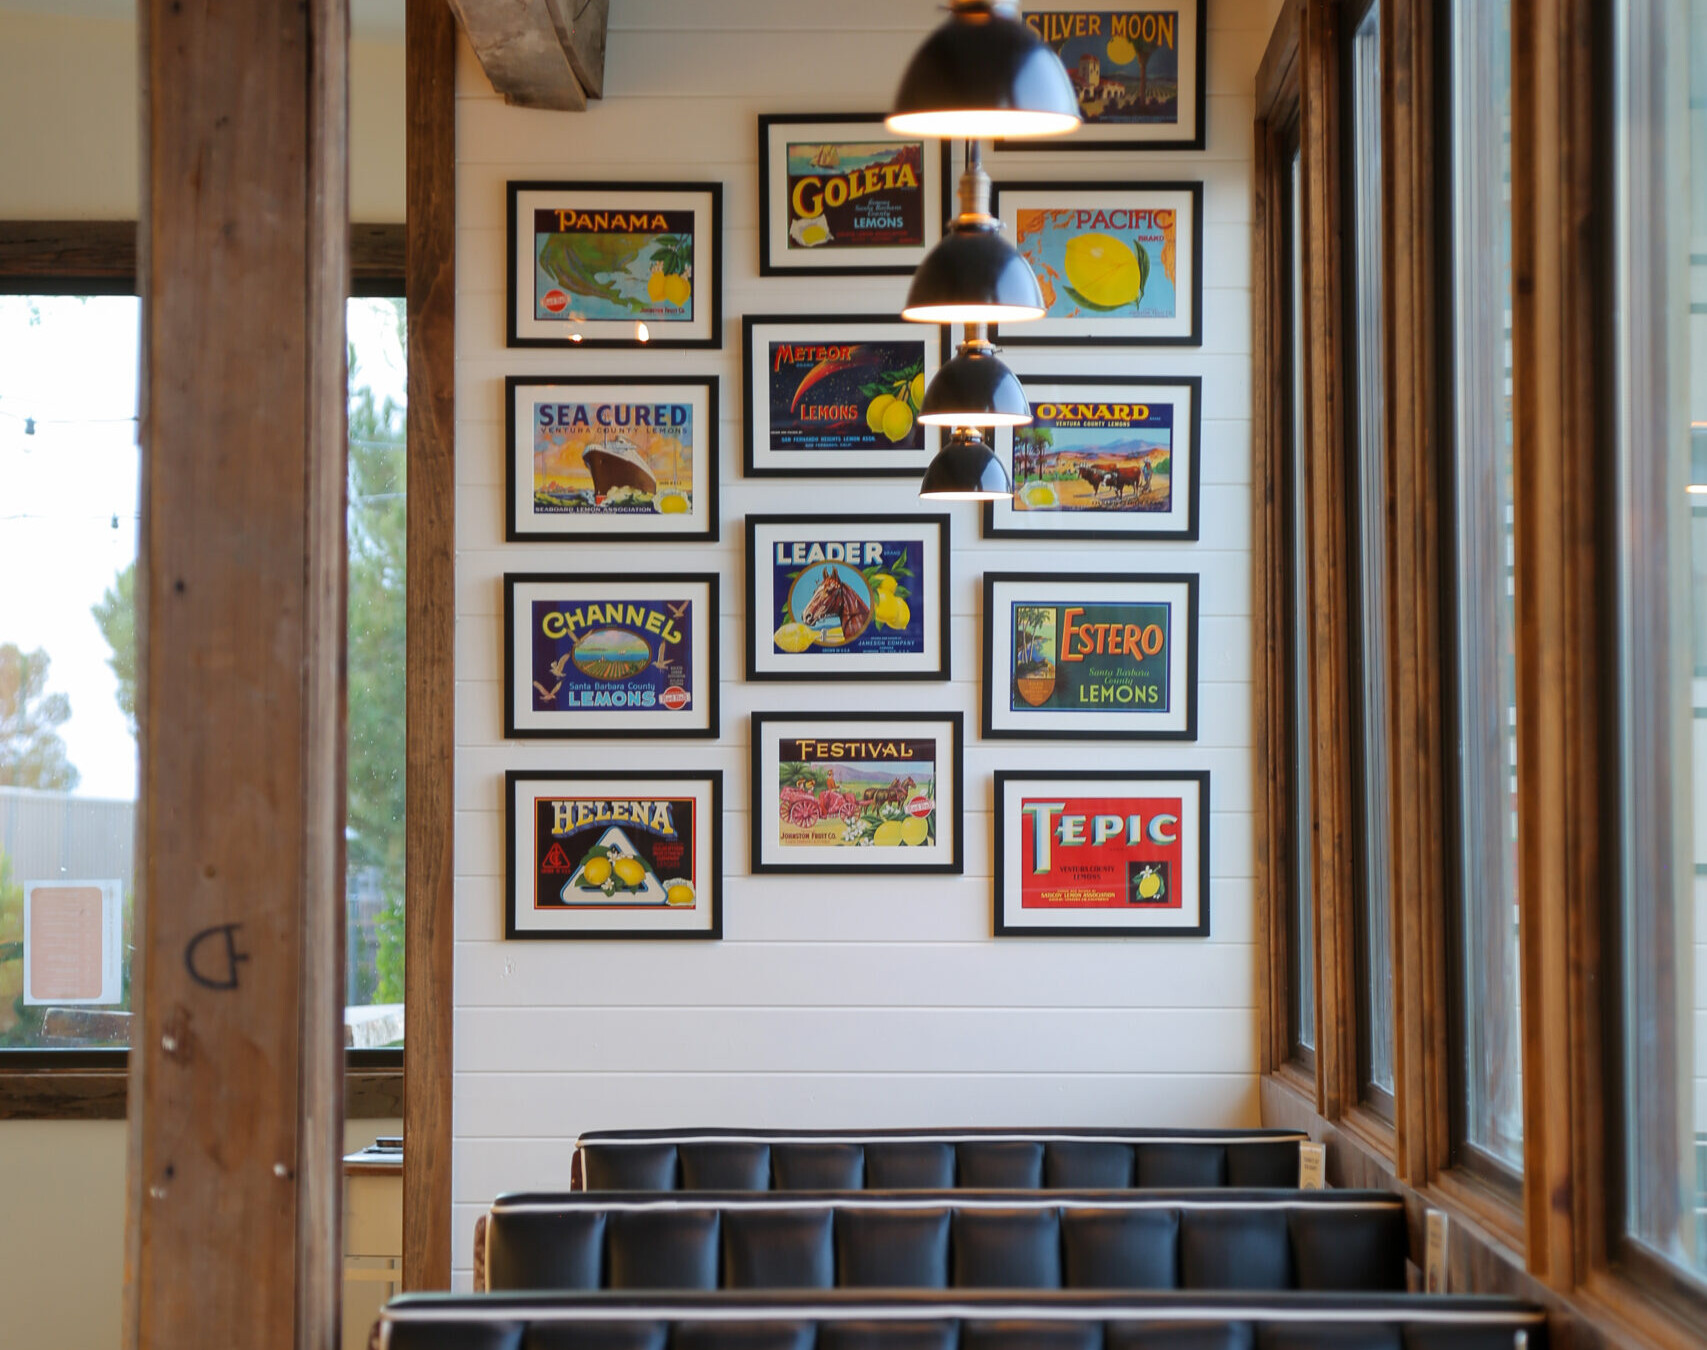 View of booths in the Cuyama Buckhorn diner with vintage graphic art displayed on the far wall located in New Cuyama, California.